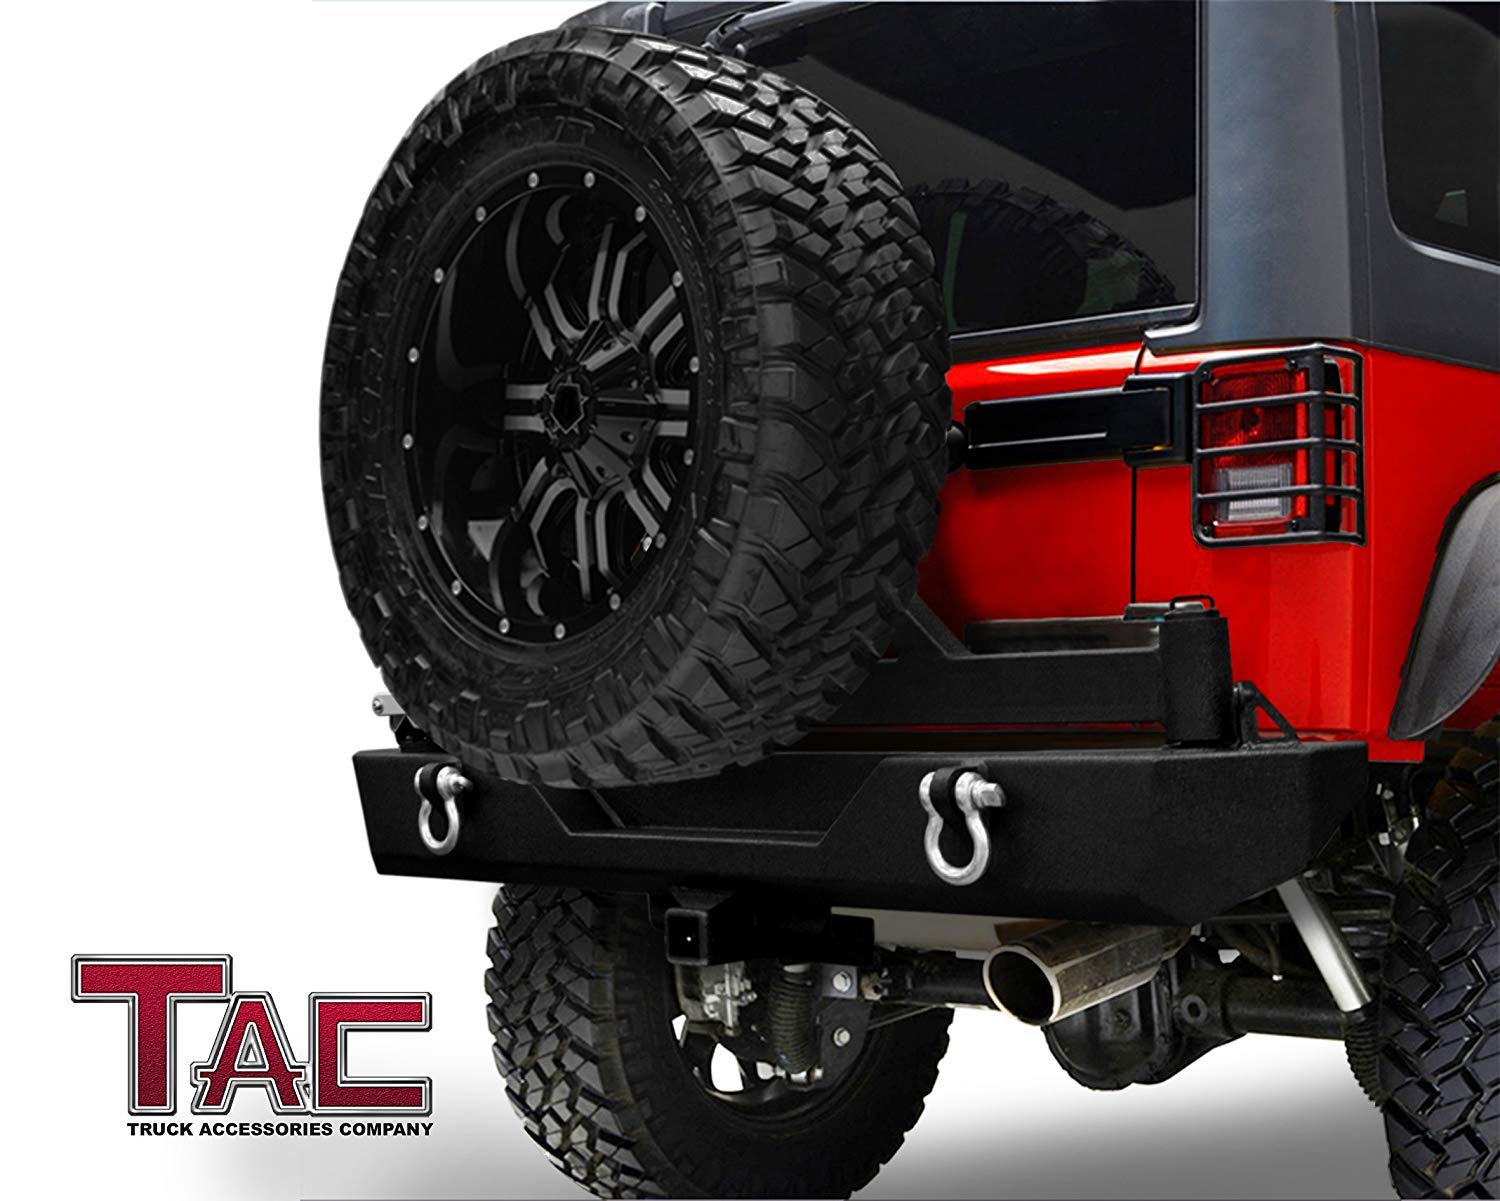 TAC Heavy Texture Black Rear Bumper and Swing Tire Carrier for 2007-2018 Jeep Wrangler JK (Exclude 18 JL Models)(2" Hitch Receiver and 4.75 Ton D-Rings Included) Front Bumper Brush Grille Guard Nudge Bar - 0